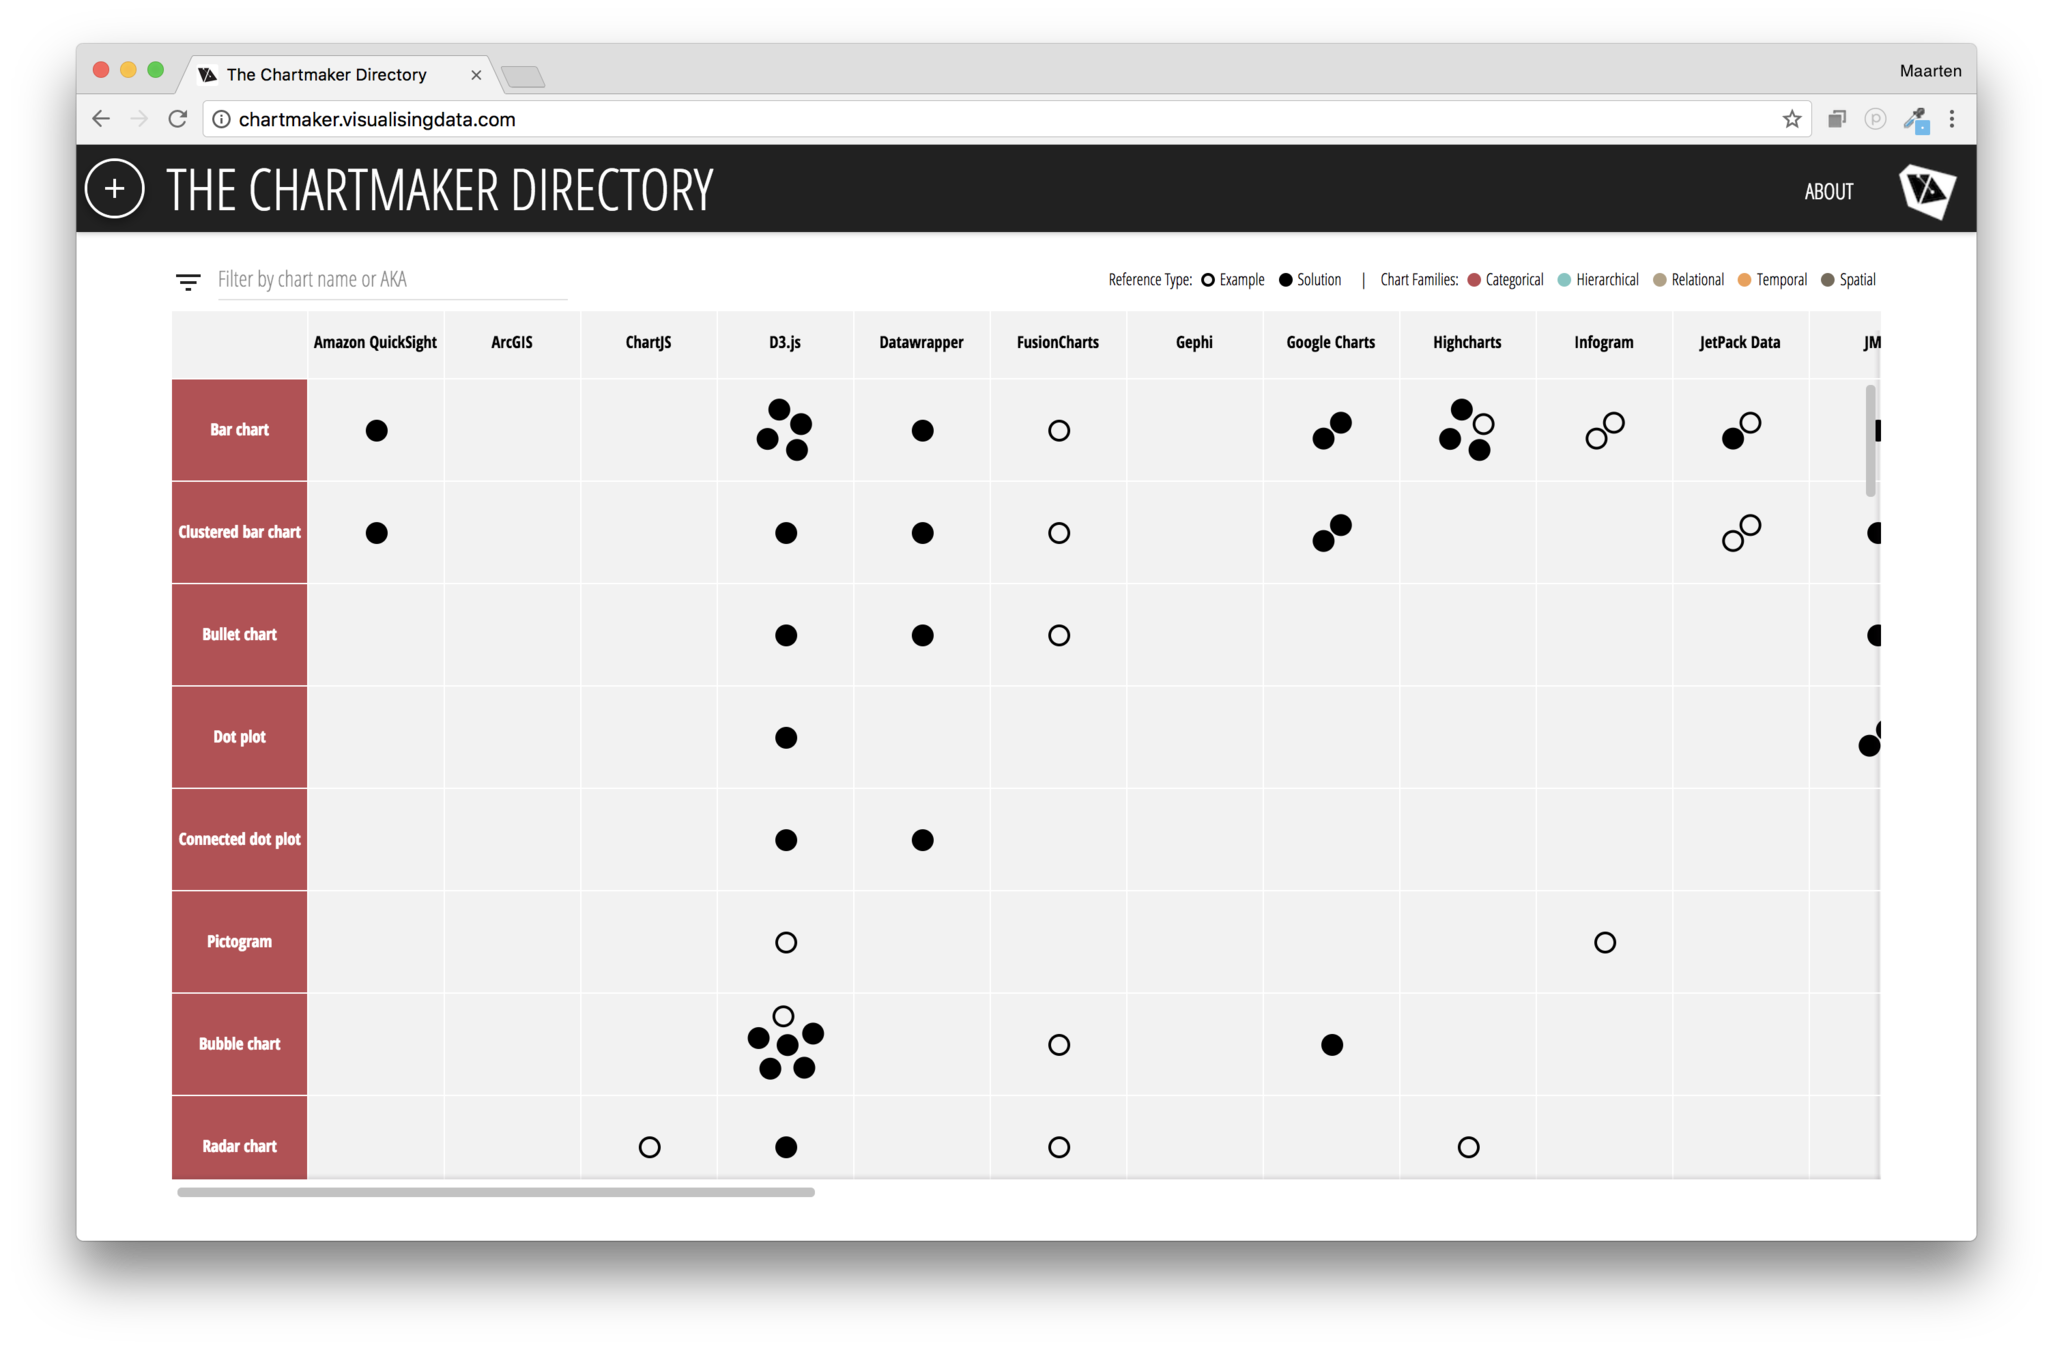 A browser window displaying the Chartmaker Directory